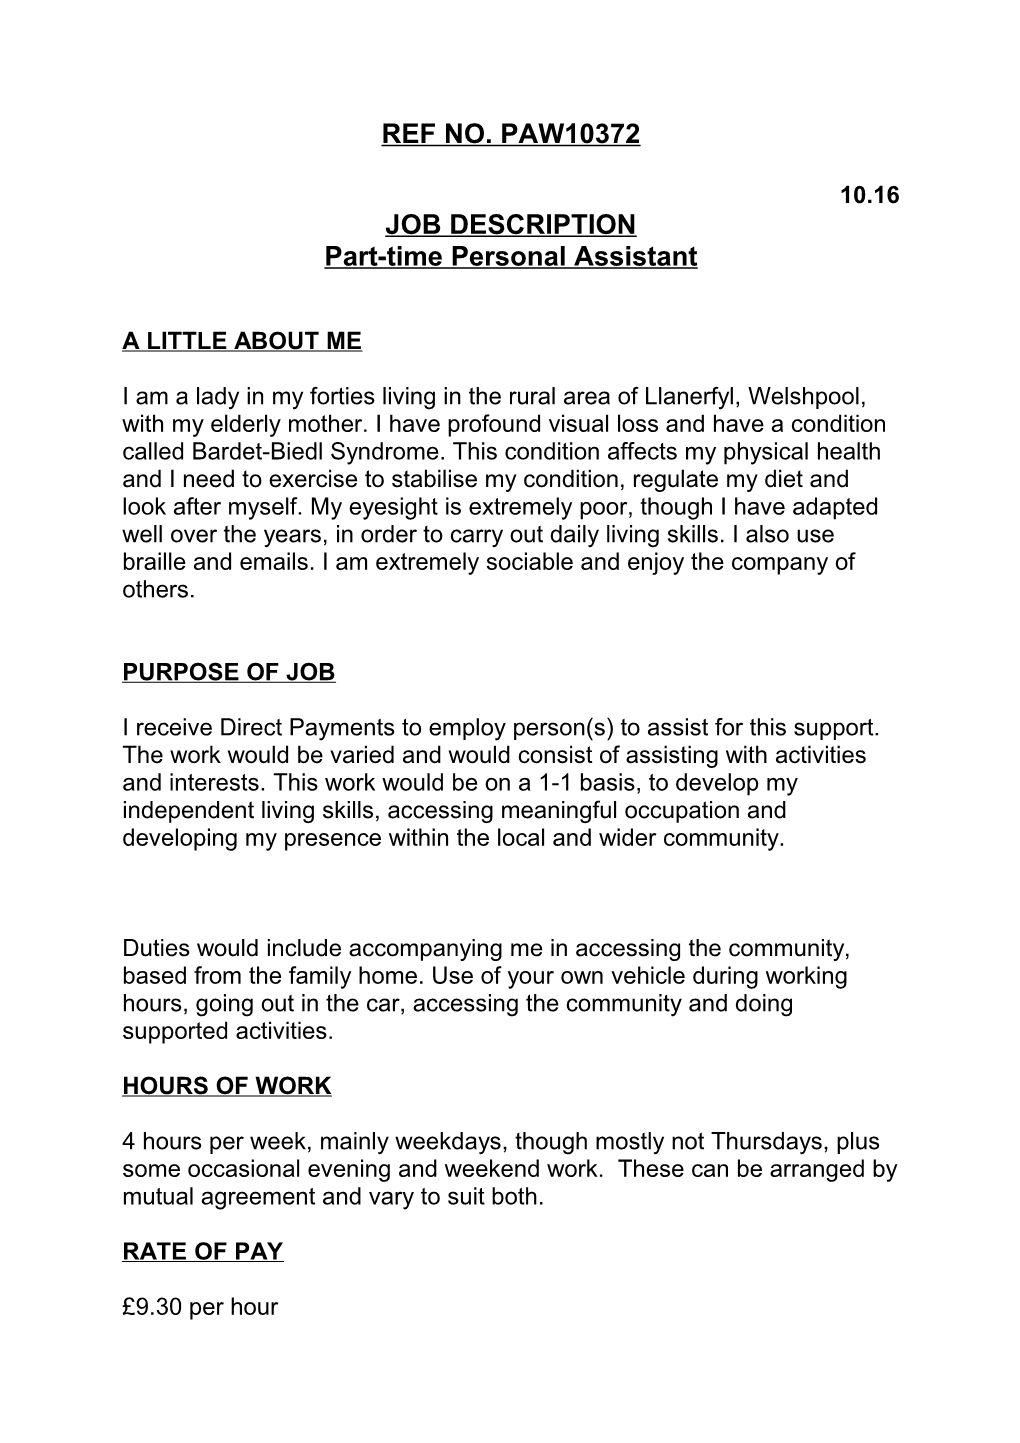 Part-Time Personal Assistant